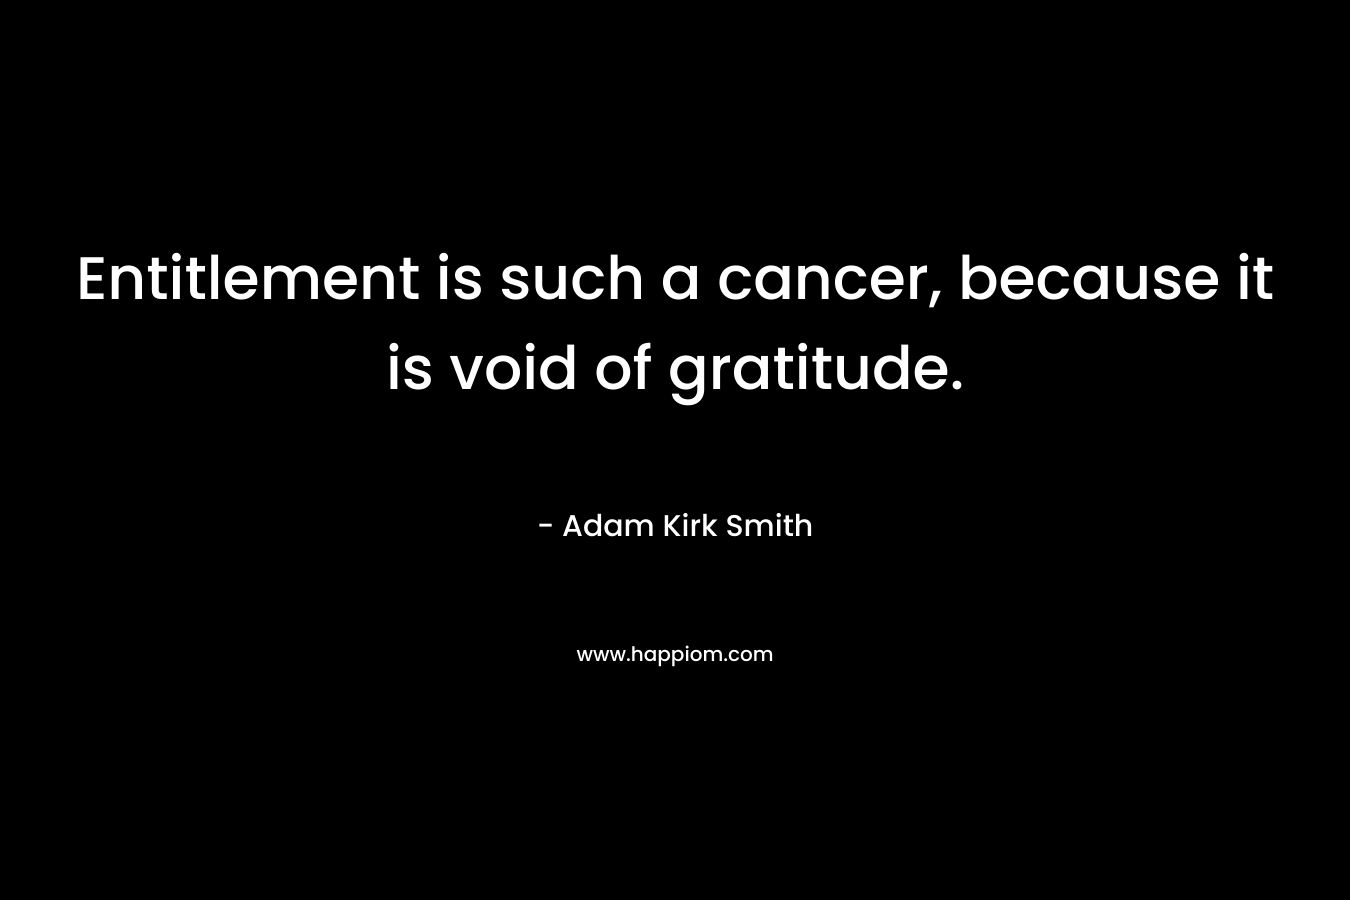 Entitlement is such a cancer, because it is void of gratitude.